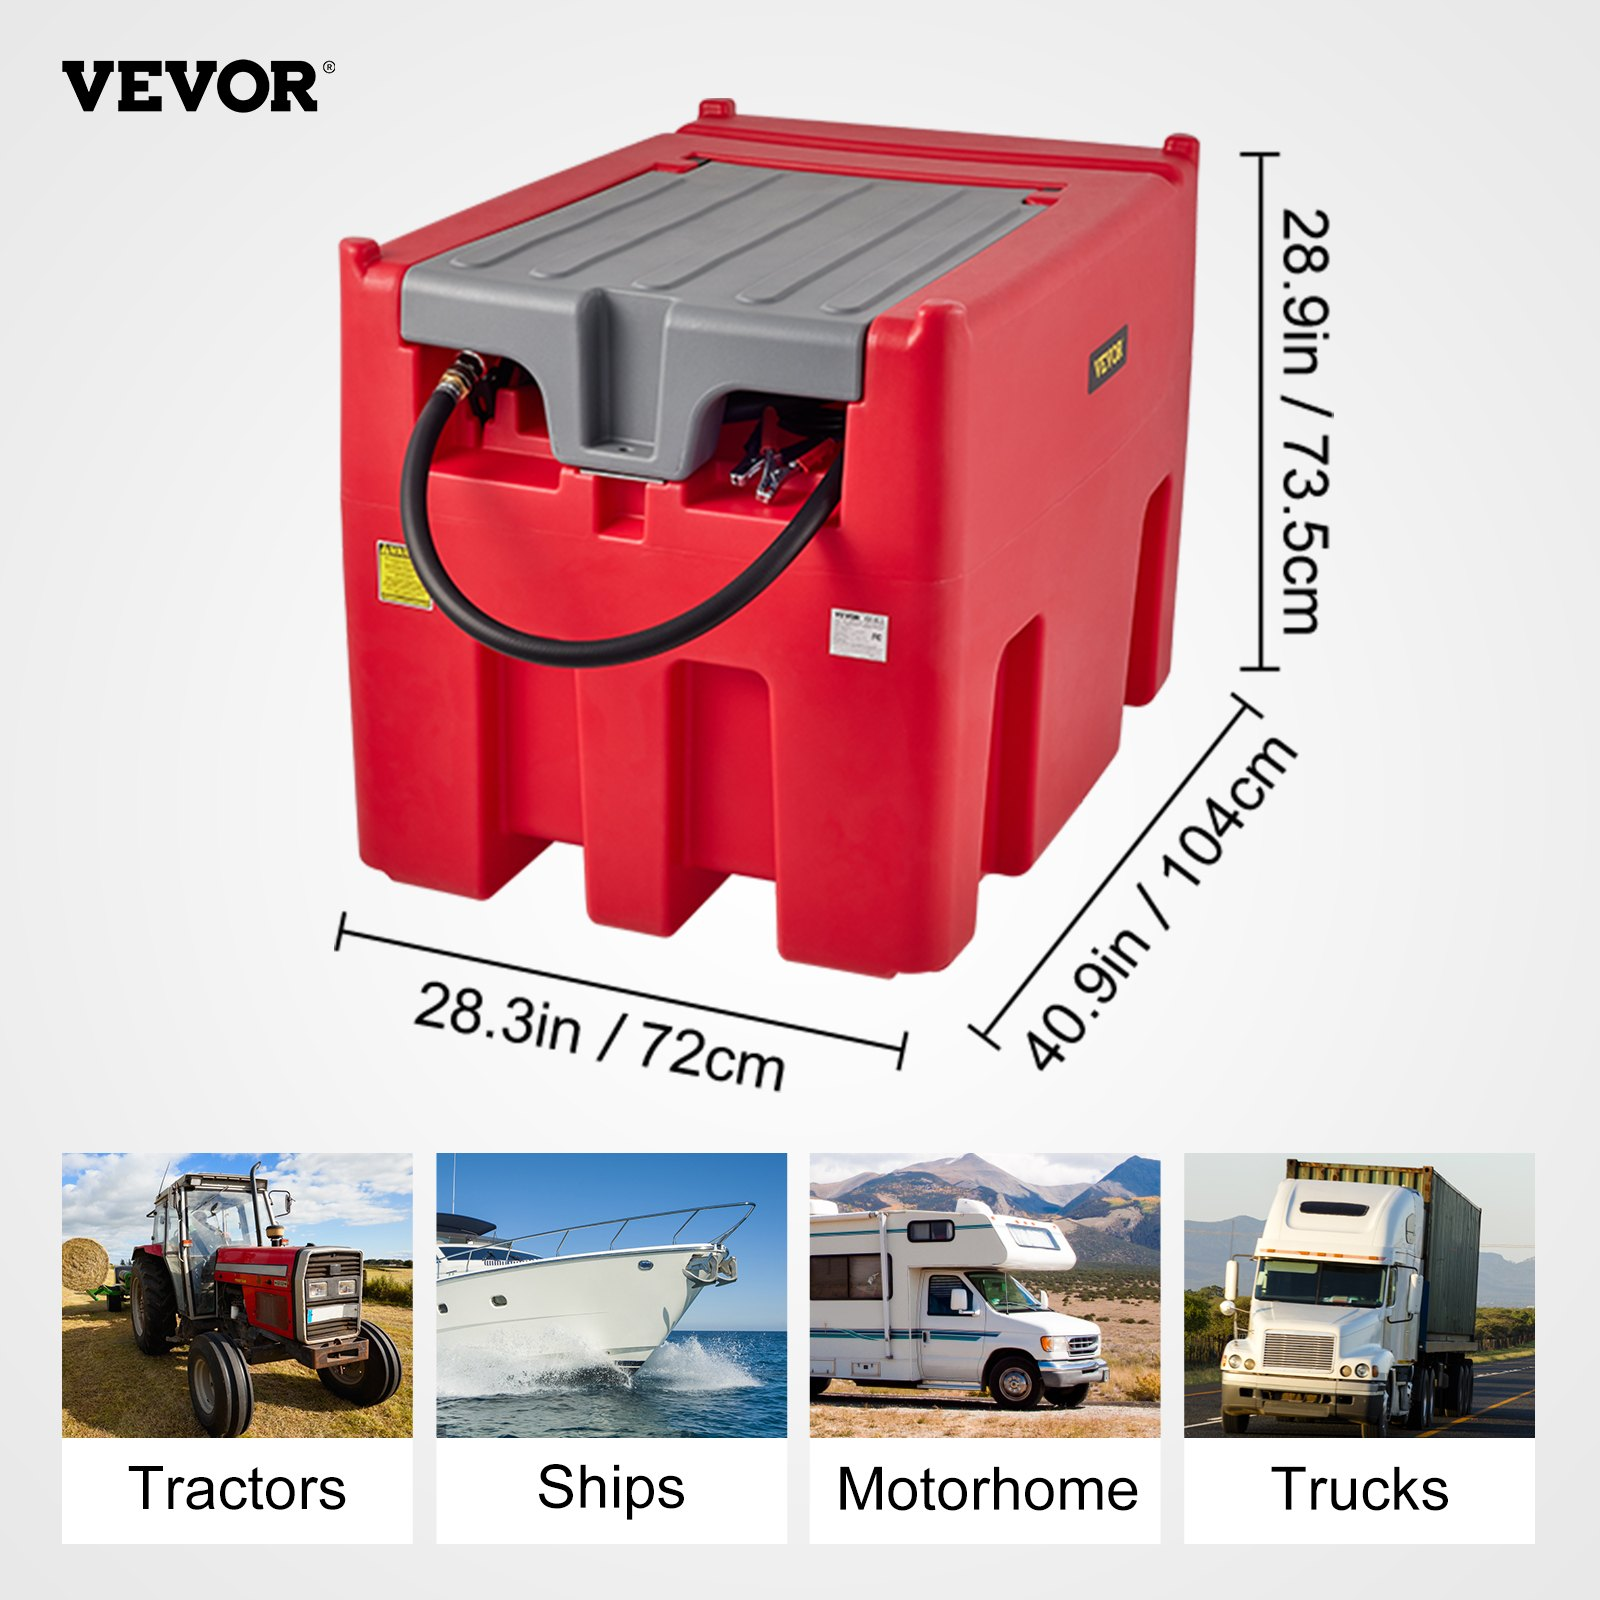 VEVOR Portable Diesel Tank, 116 Gallon Capacity & 10 GPM Flow Rate, Diesel Fuel Tank with 12V Electric Transfer Pump and 13.1ft Rubber Hose, PE Diesel Transfer Tank for Easy Fuel Transportation, Red, Goodies N Stuff